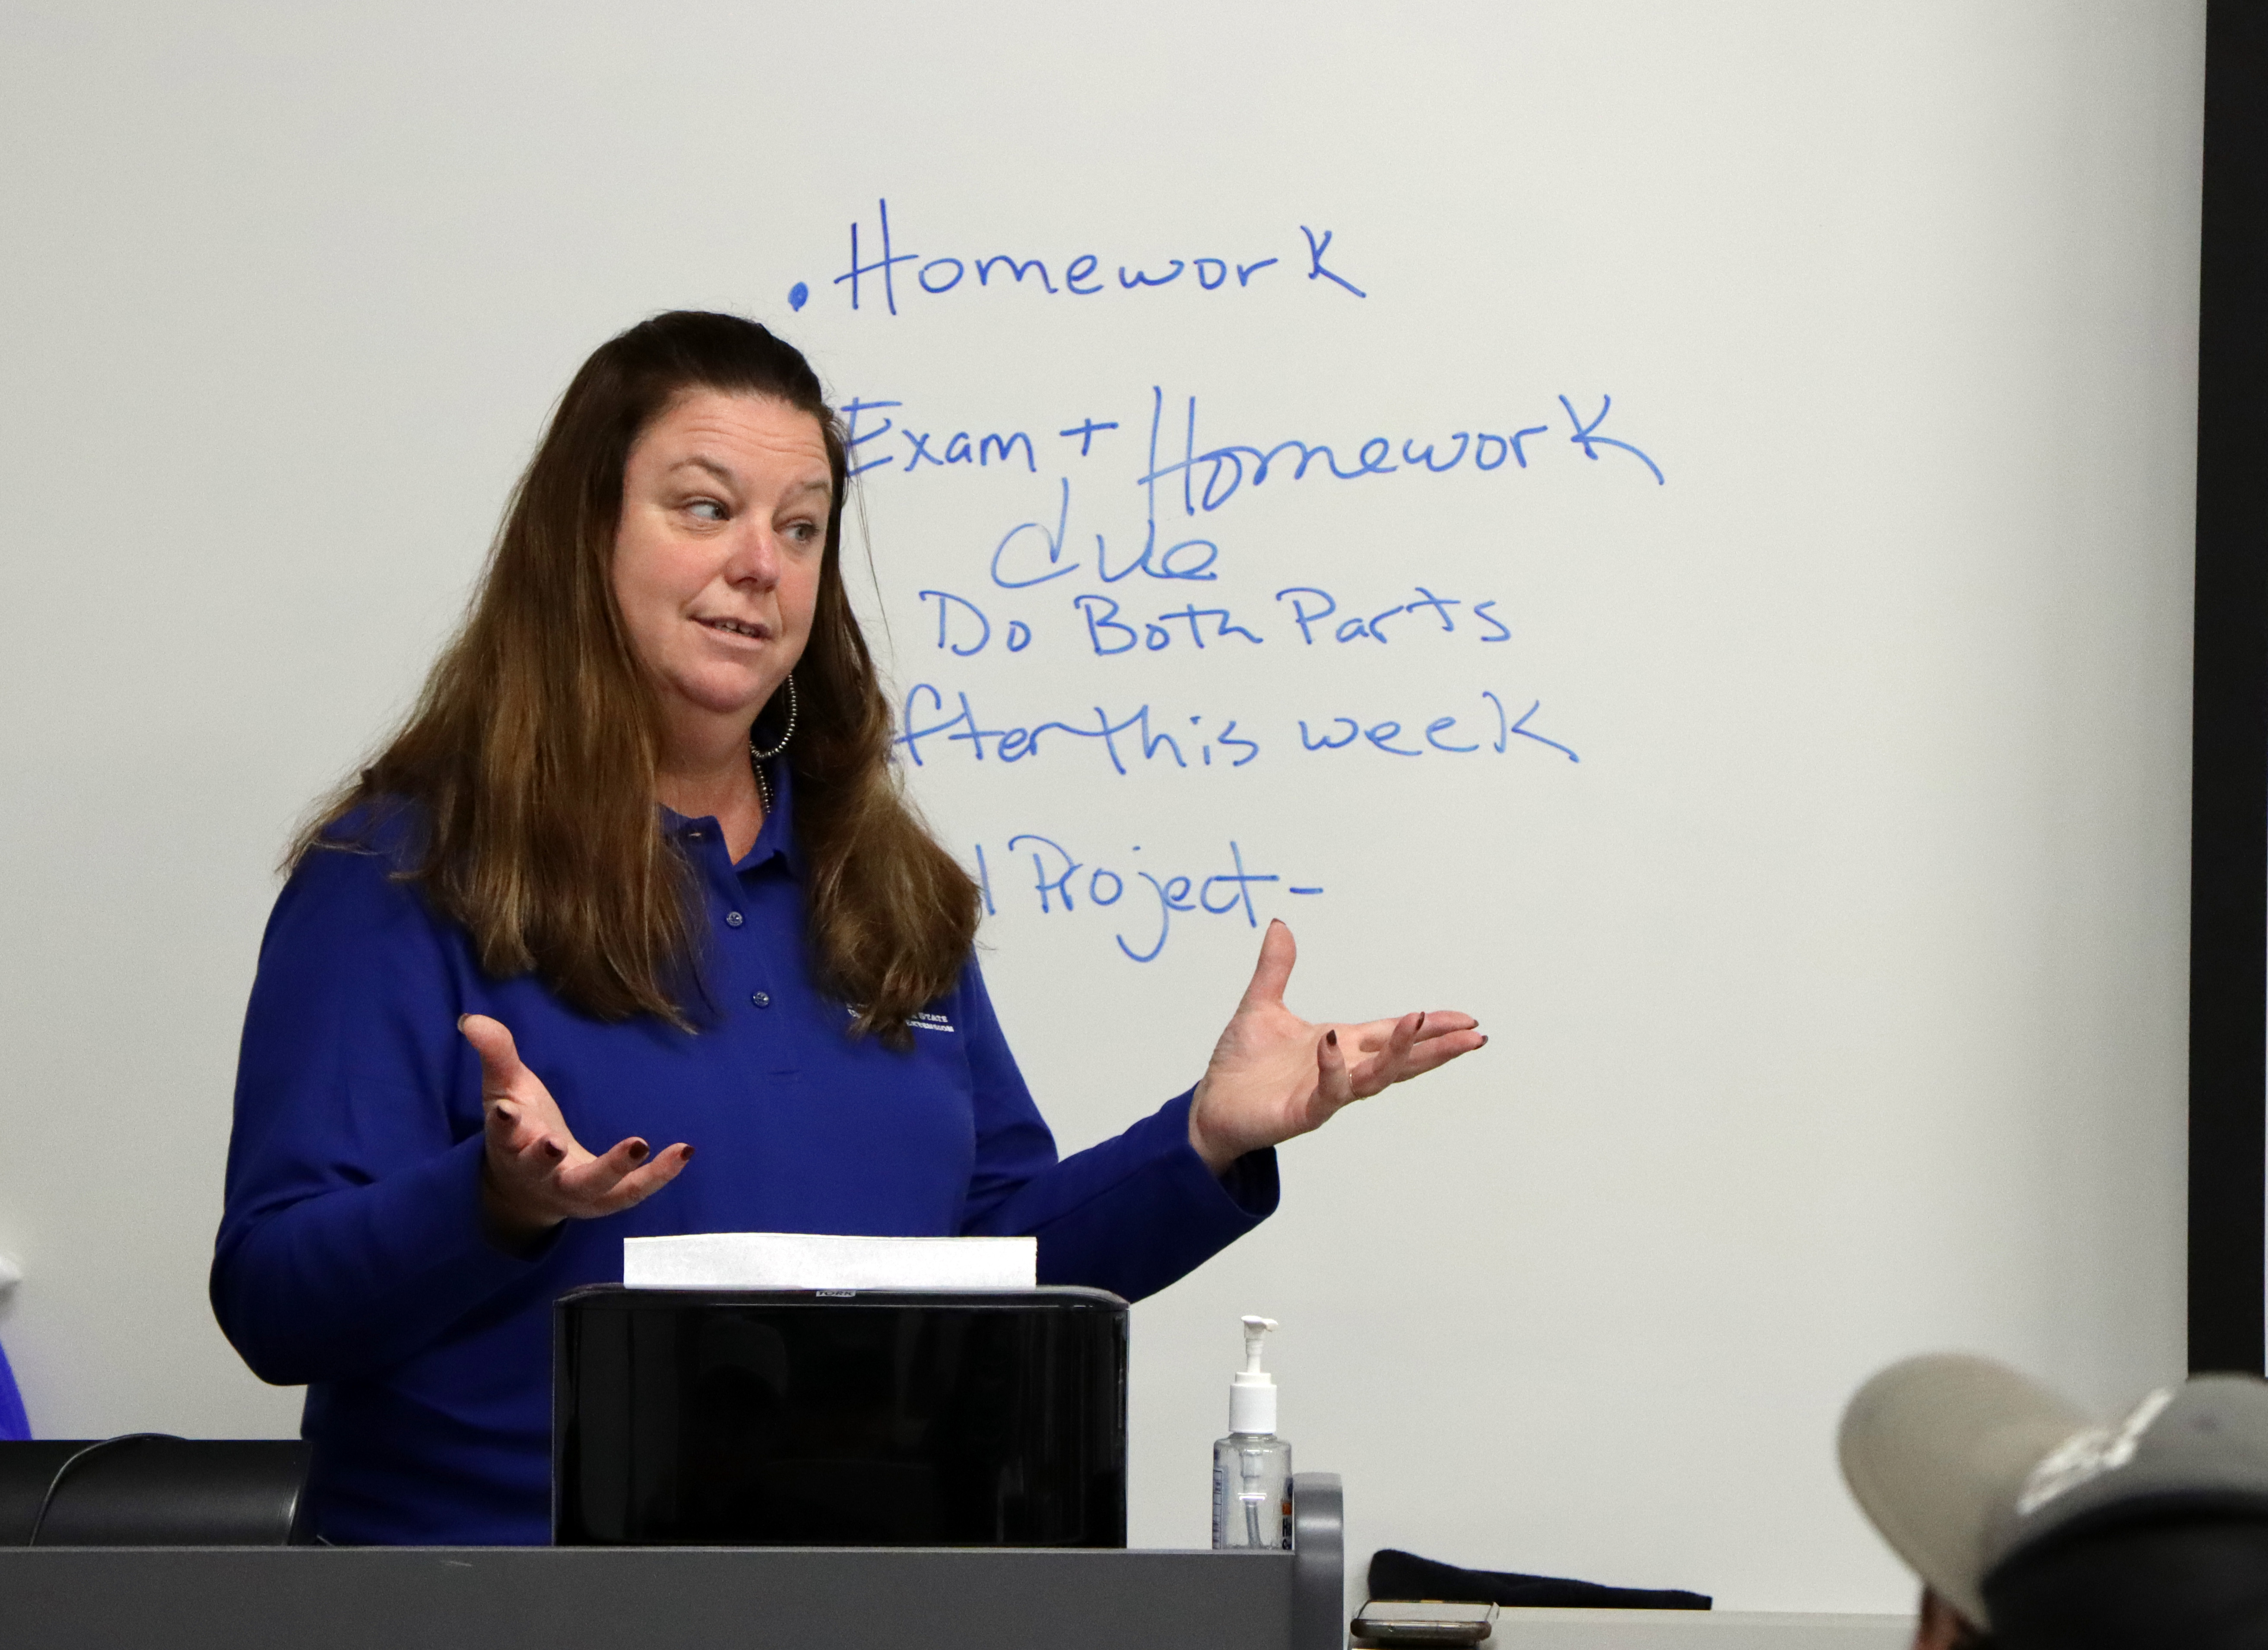 Heather Gessner gestures to her classroom. She's wearing a blue shirt and standing in front of a white board with the bullet points homework, exam plus homework due, do both parts, after this week